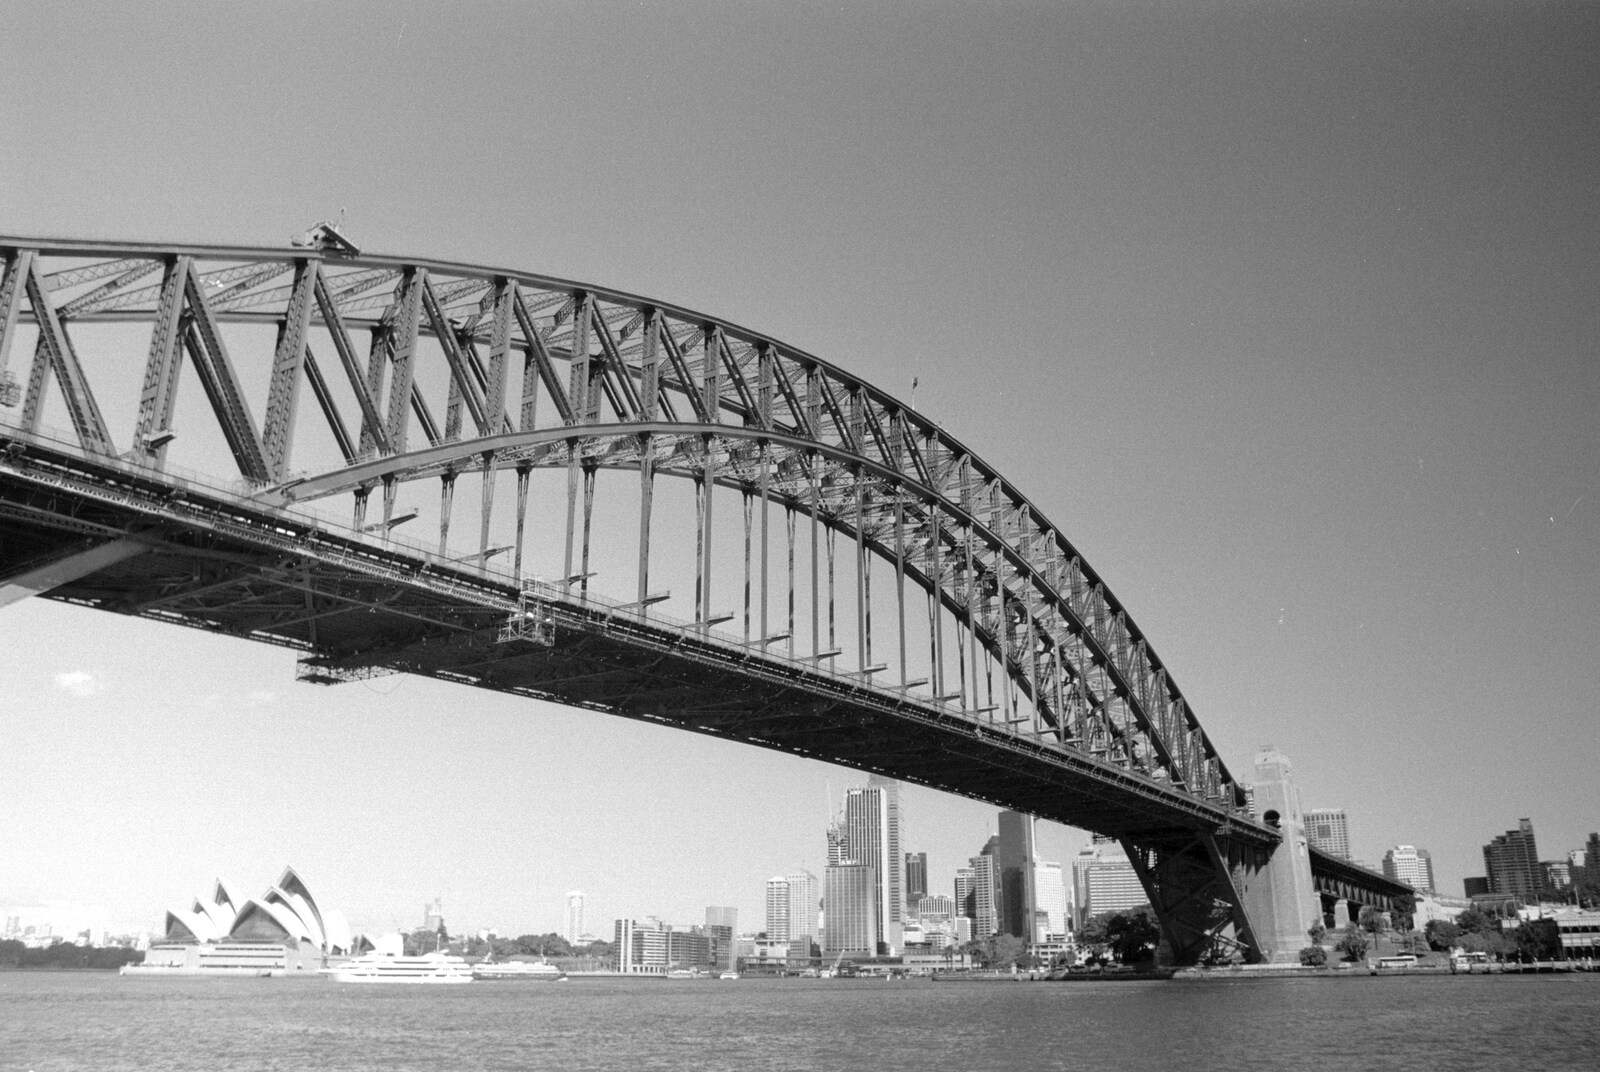 Black and white bridge from A Trip to the Zoo, Sydney, Australia - 7th April 2000